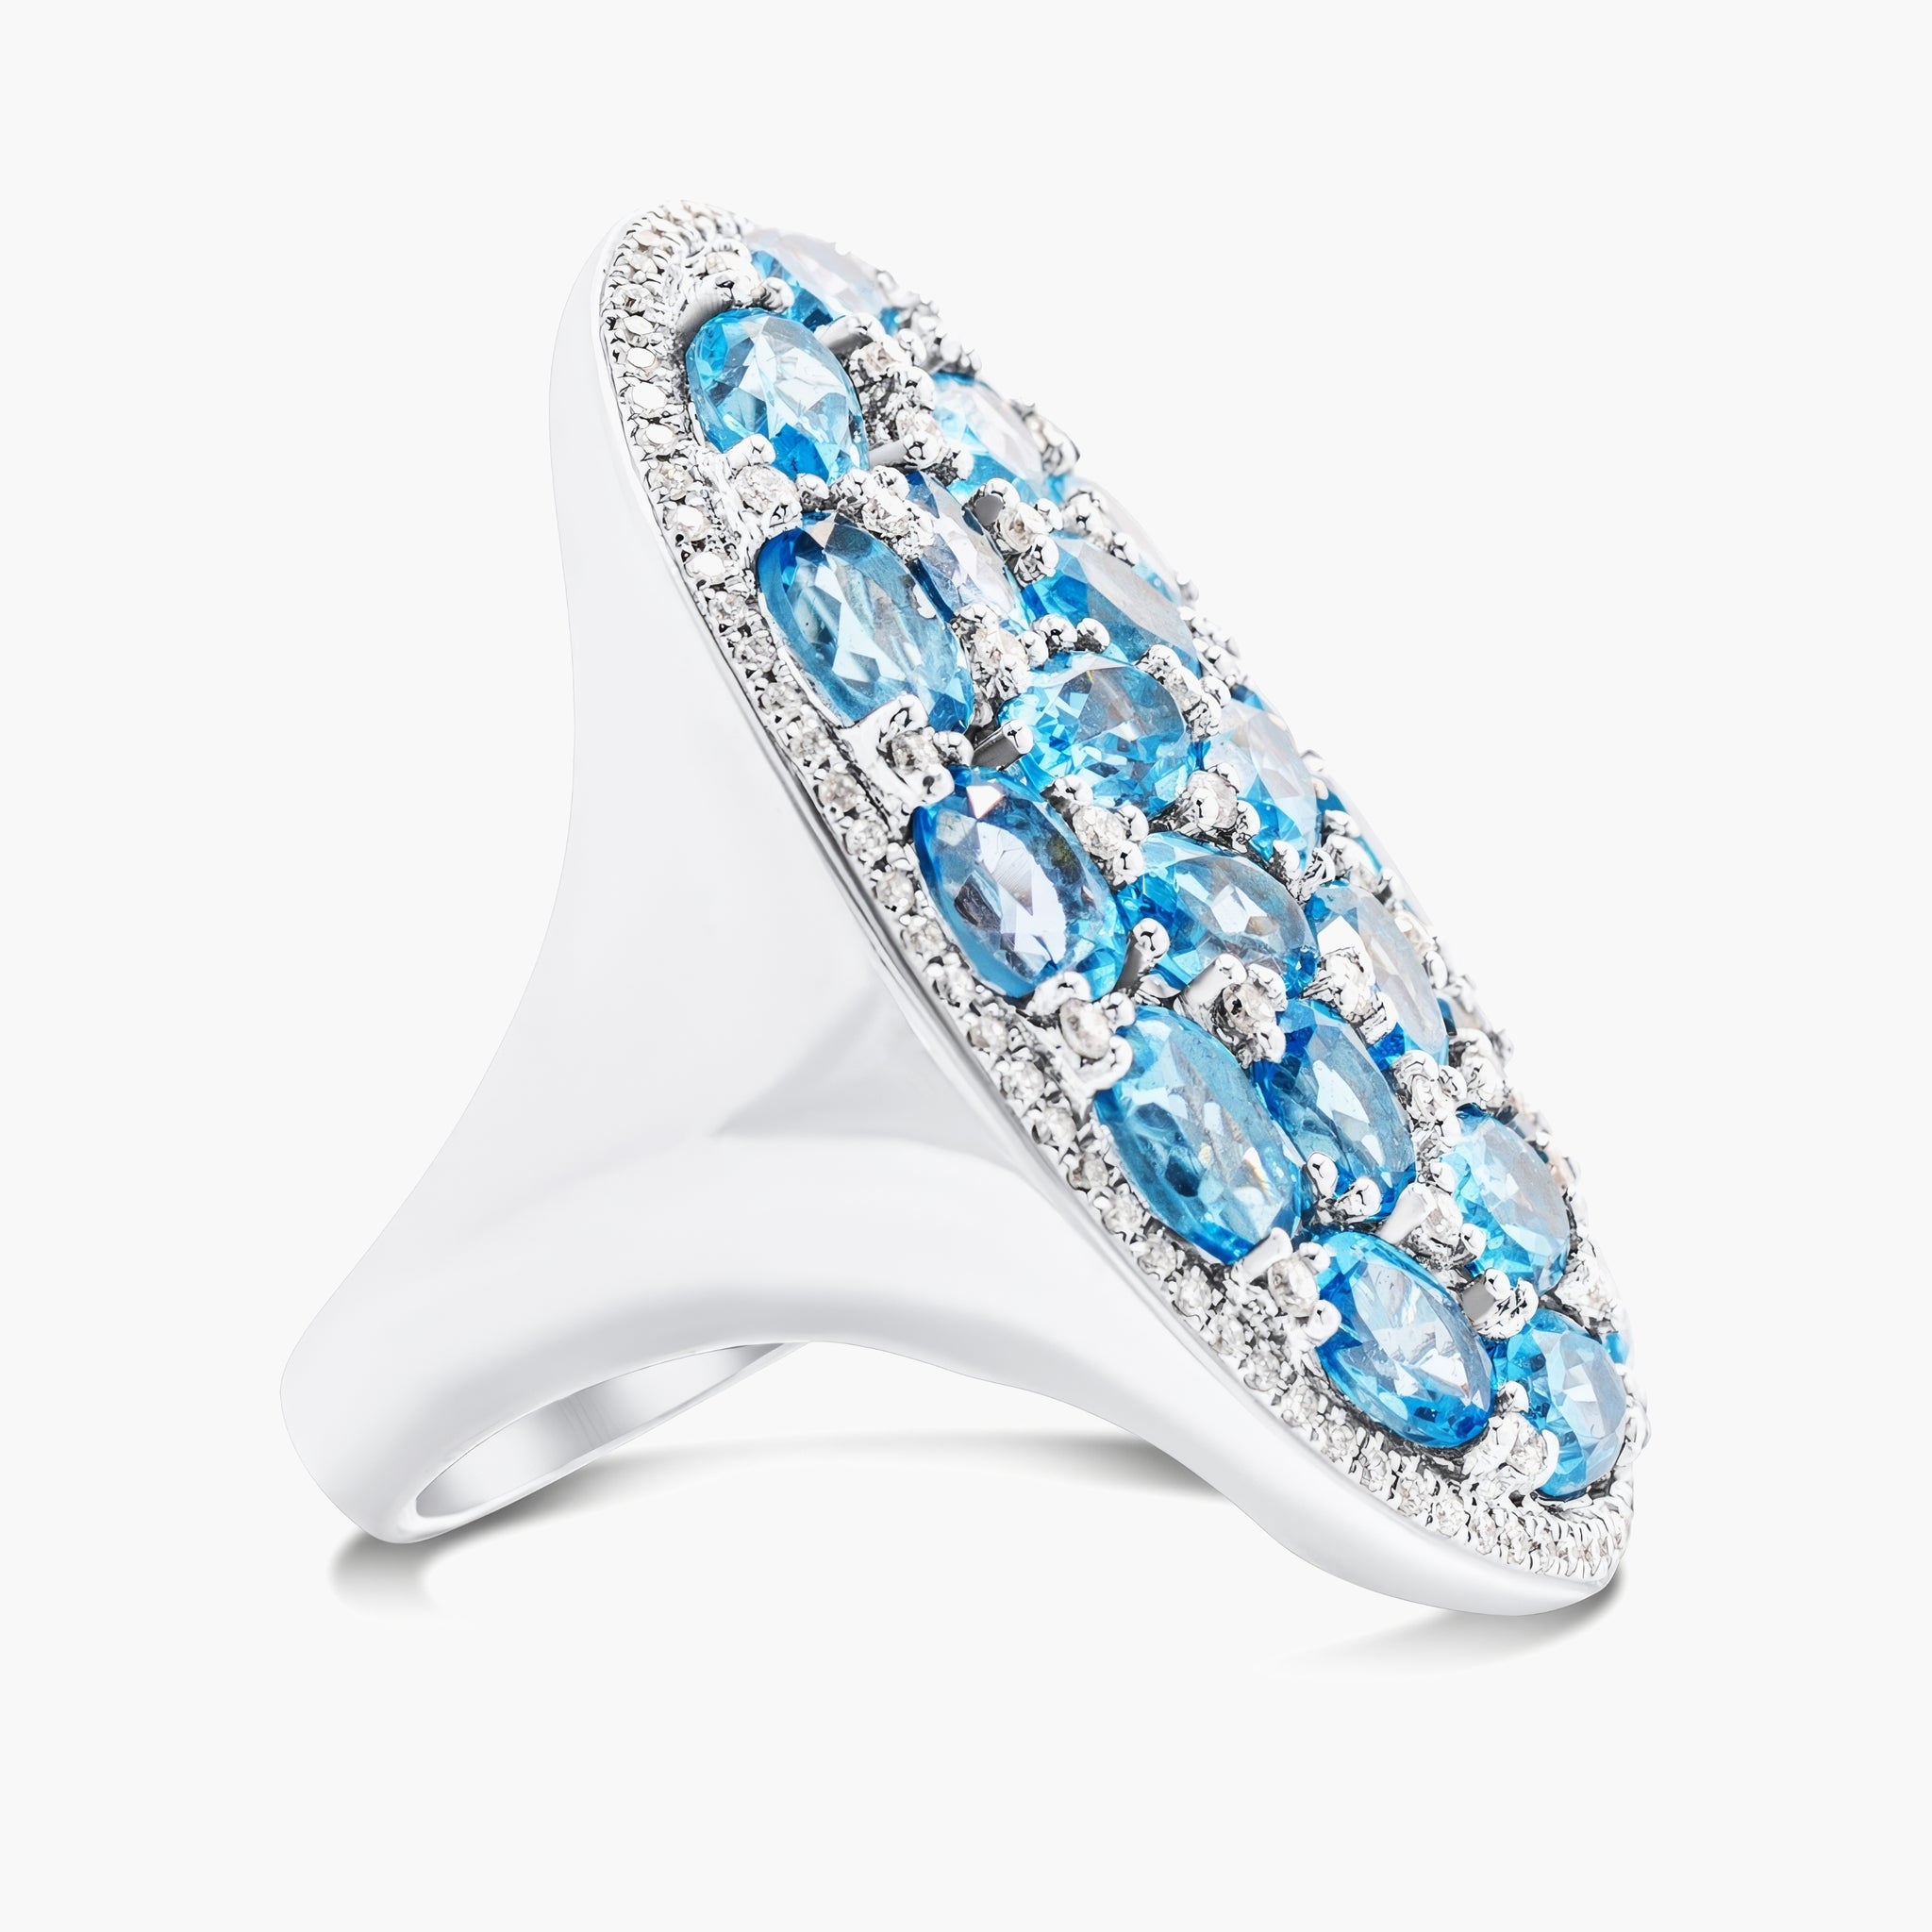 Blue topaz and diamond oval ring